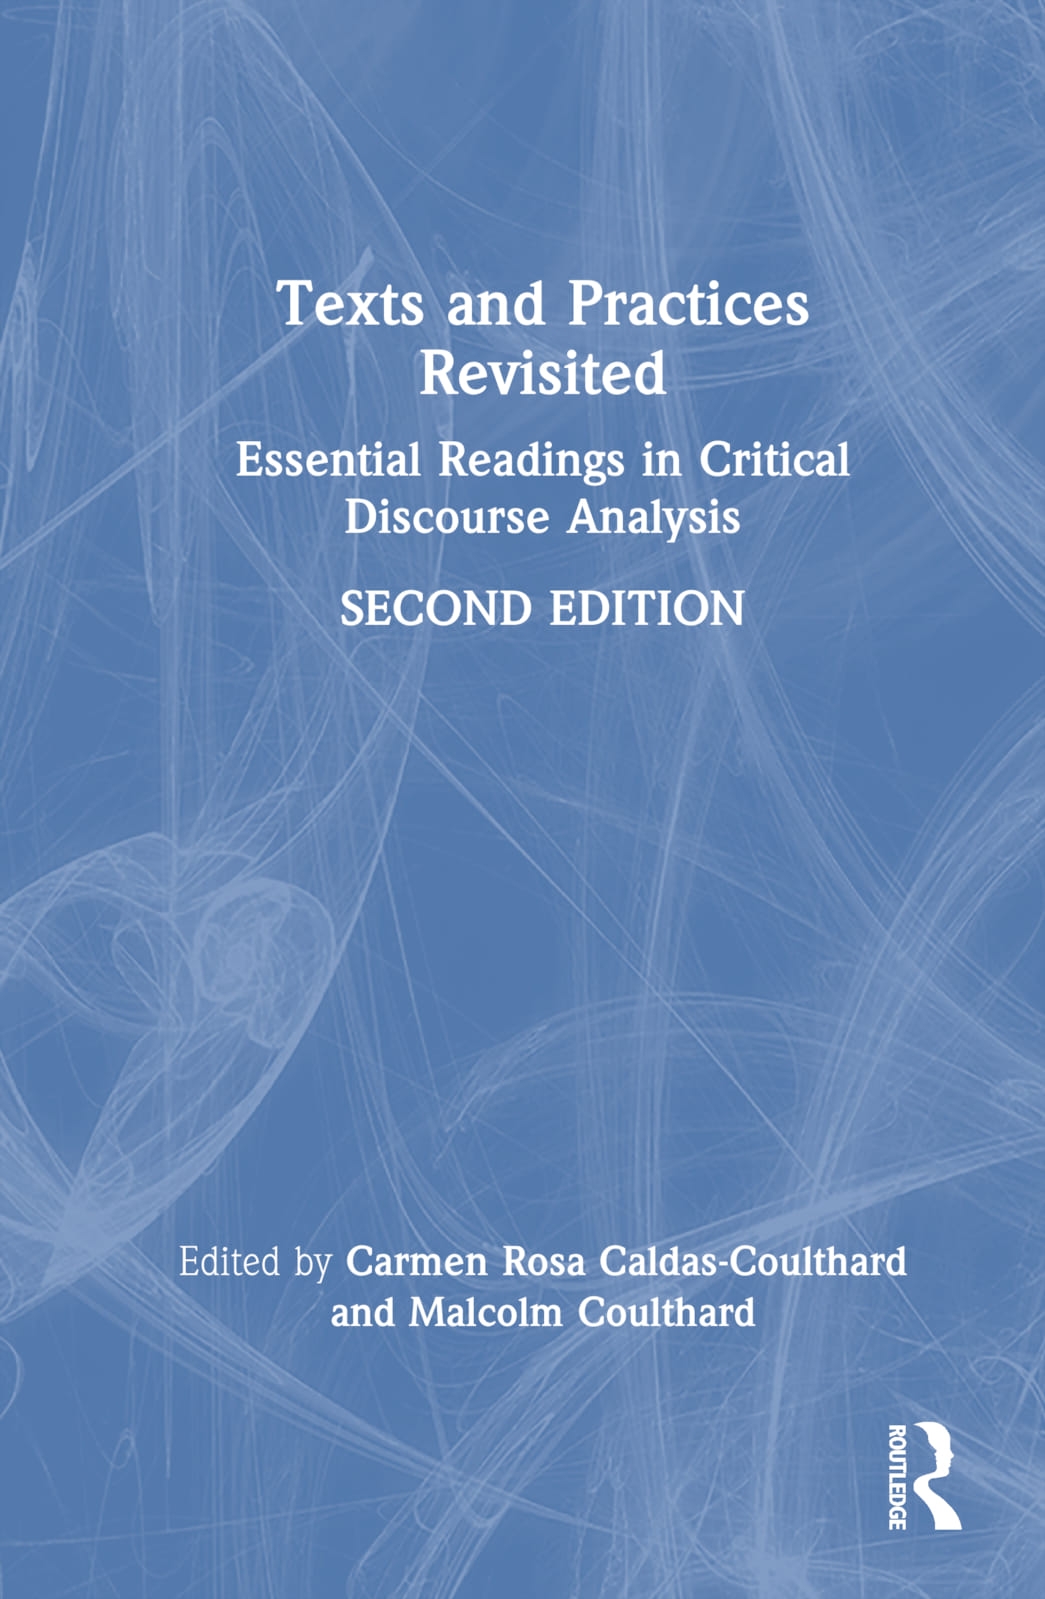 Texts and Practices Revisited: Essential Readings in Critical Discourse Analysis